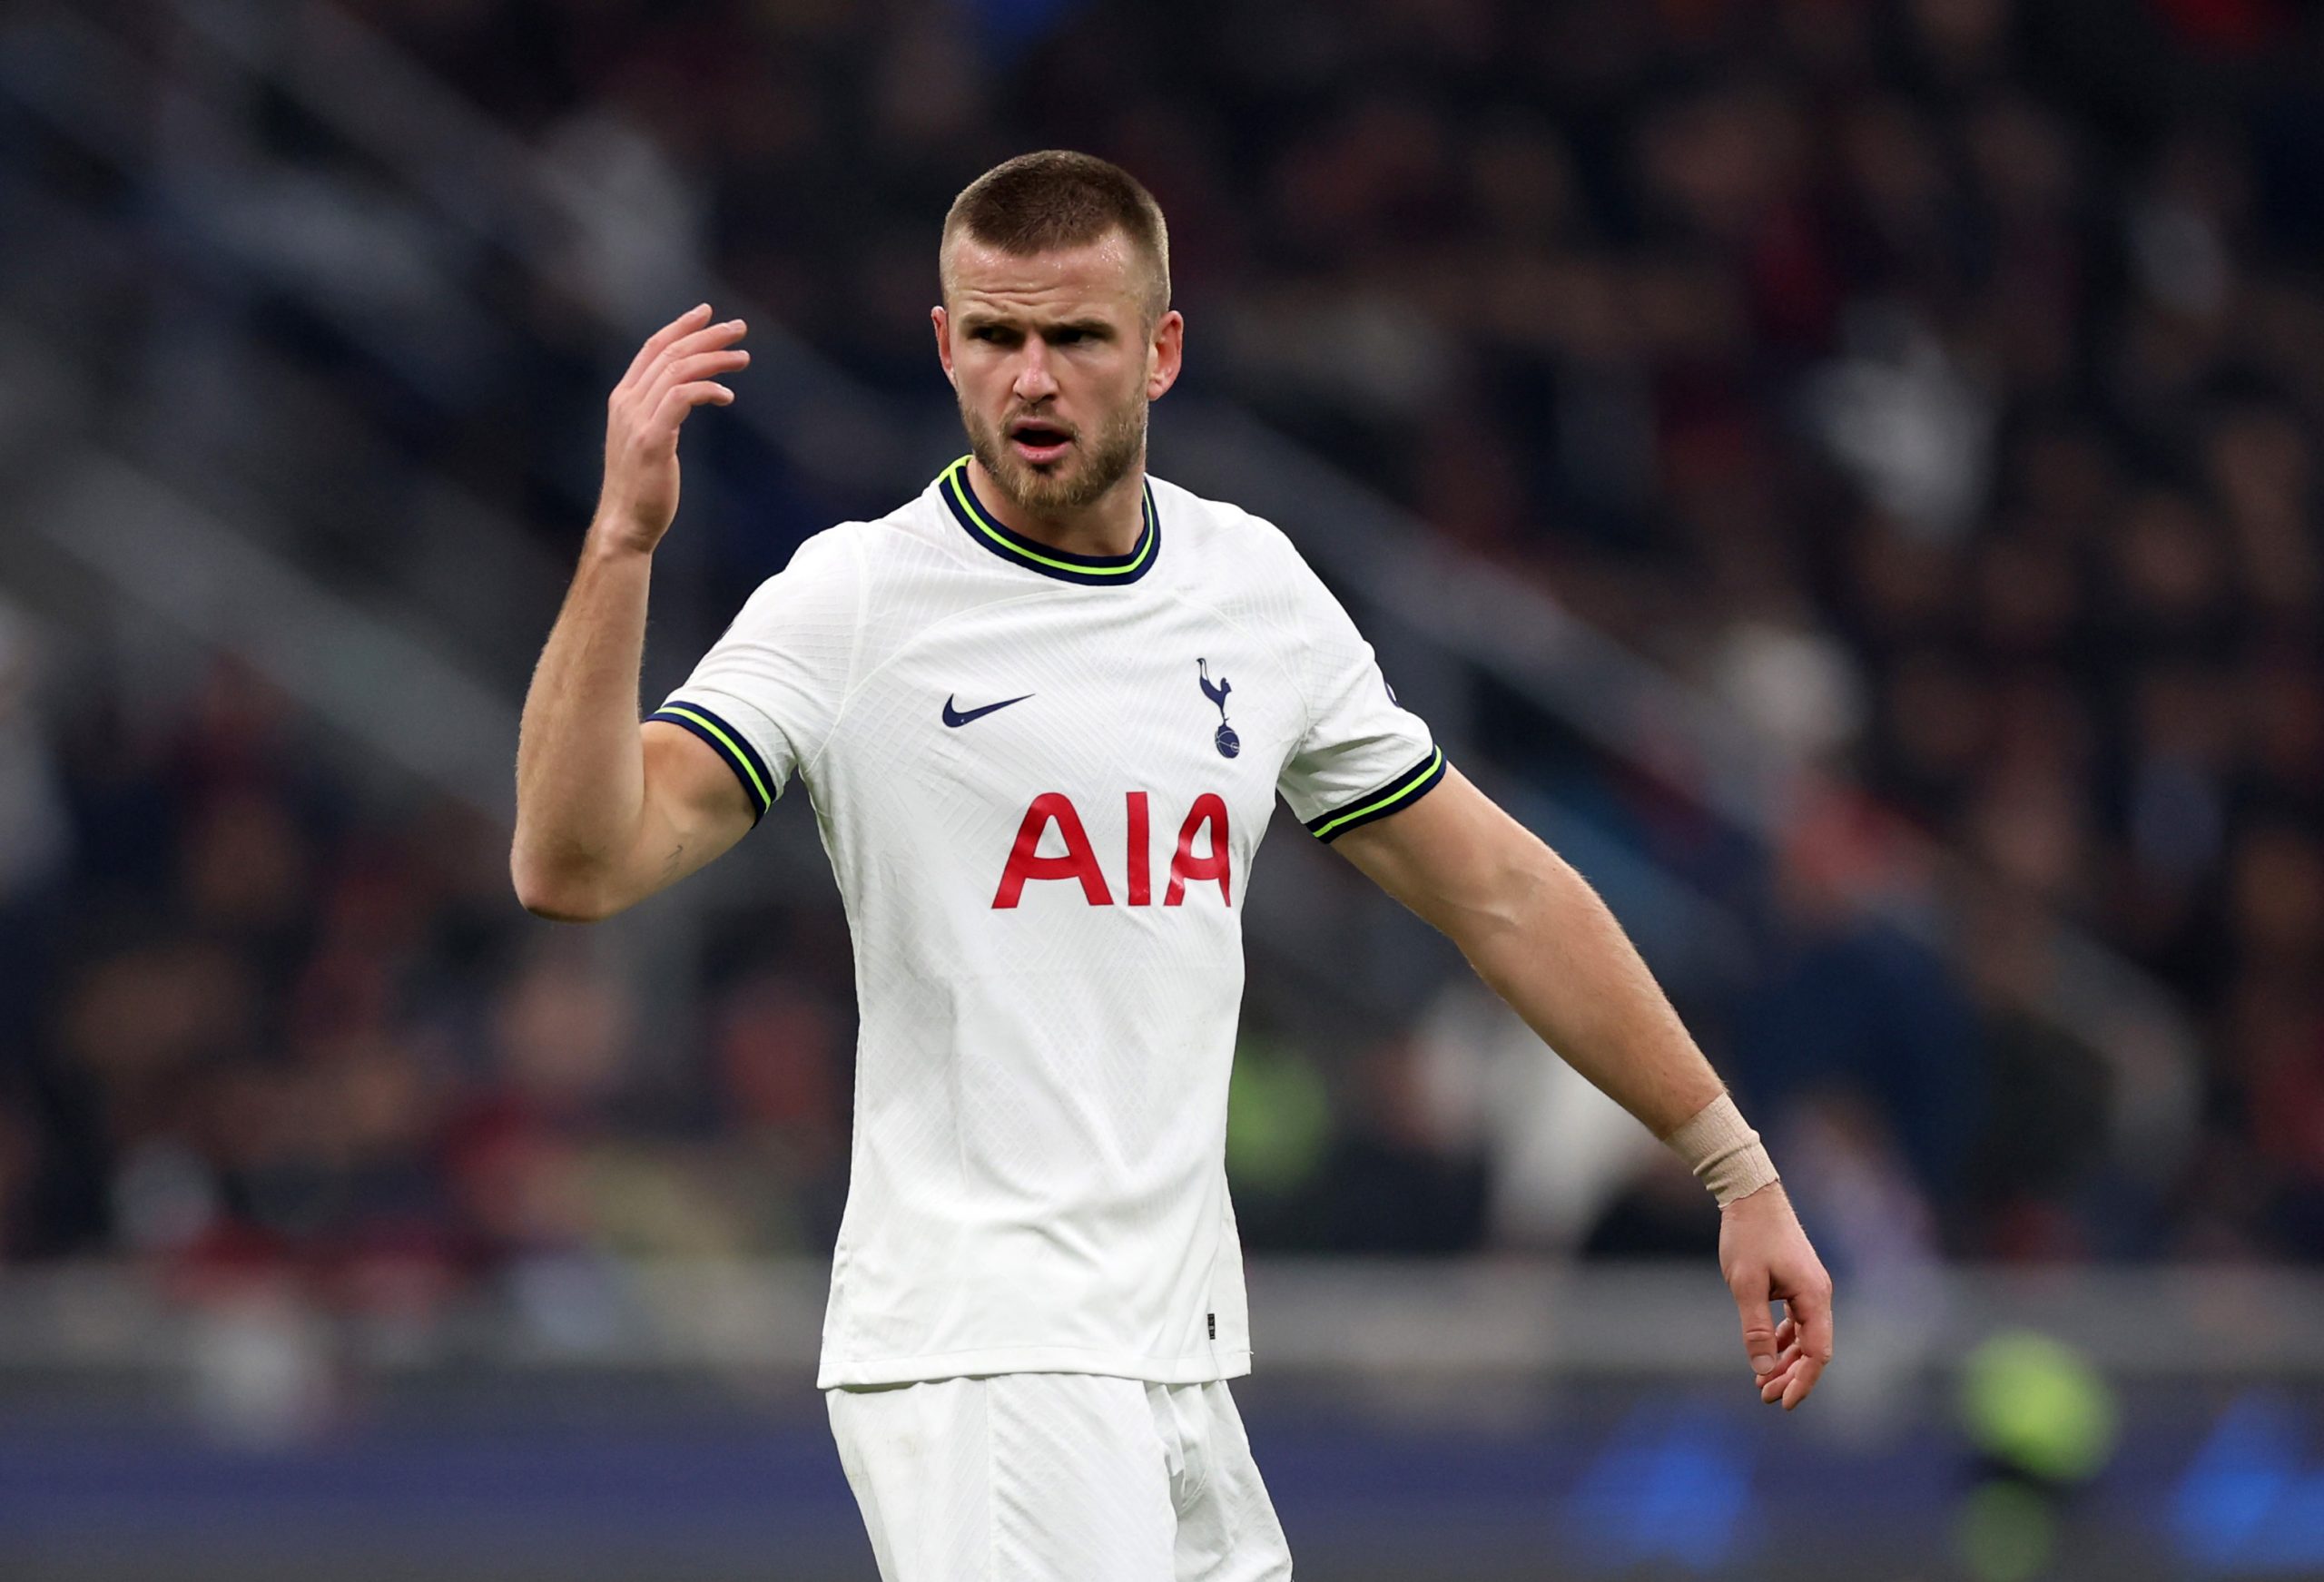 Tottenham Hotspur man Eric Dier says he wished he did more to help Dele Alli overcome his mental struggles.